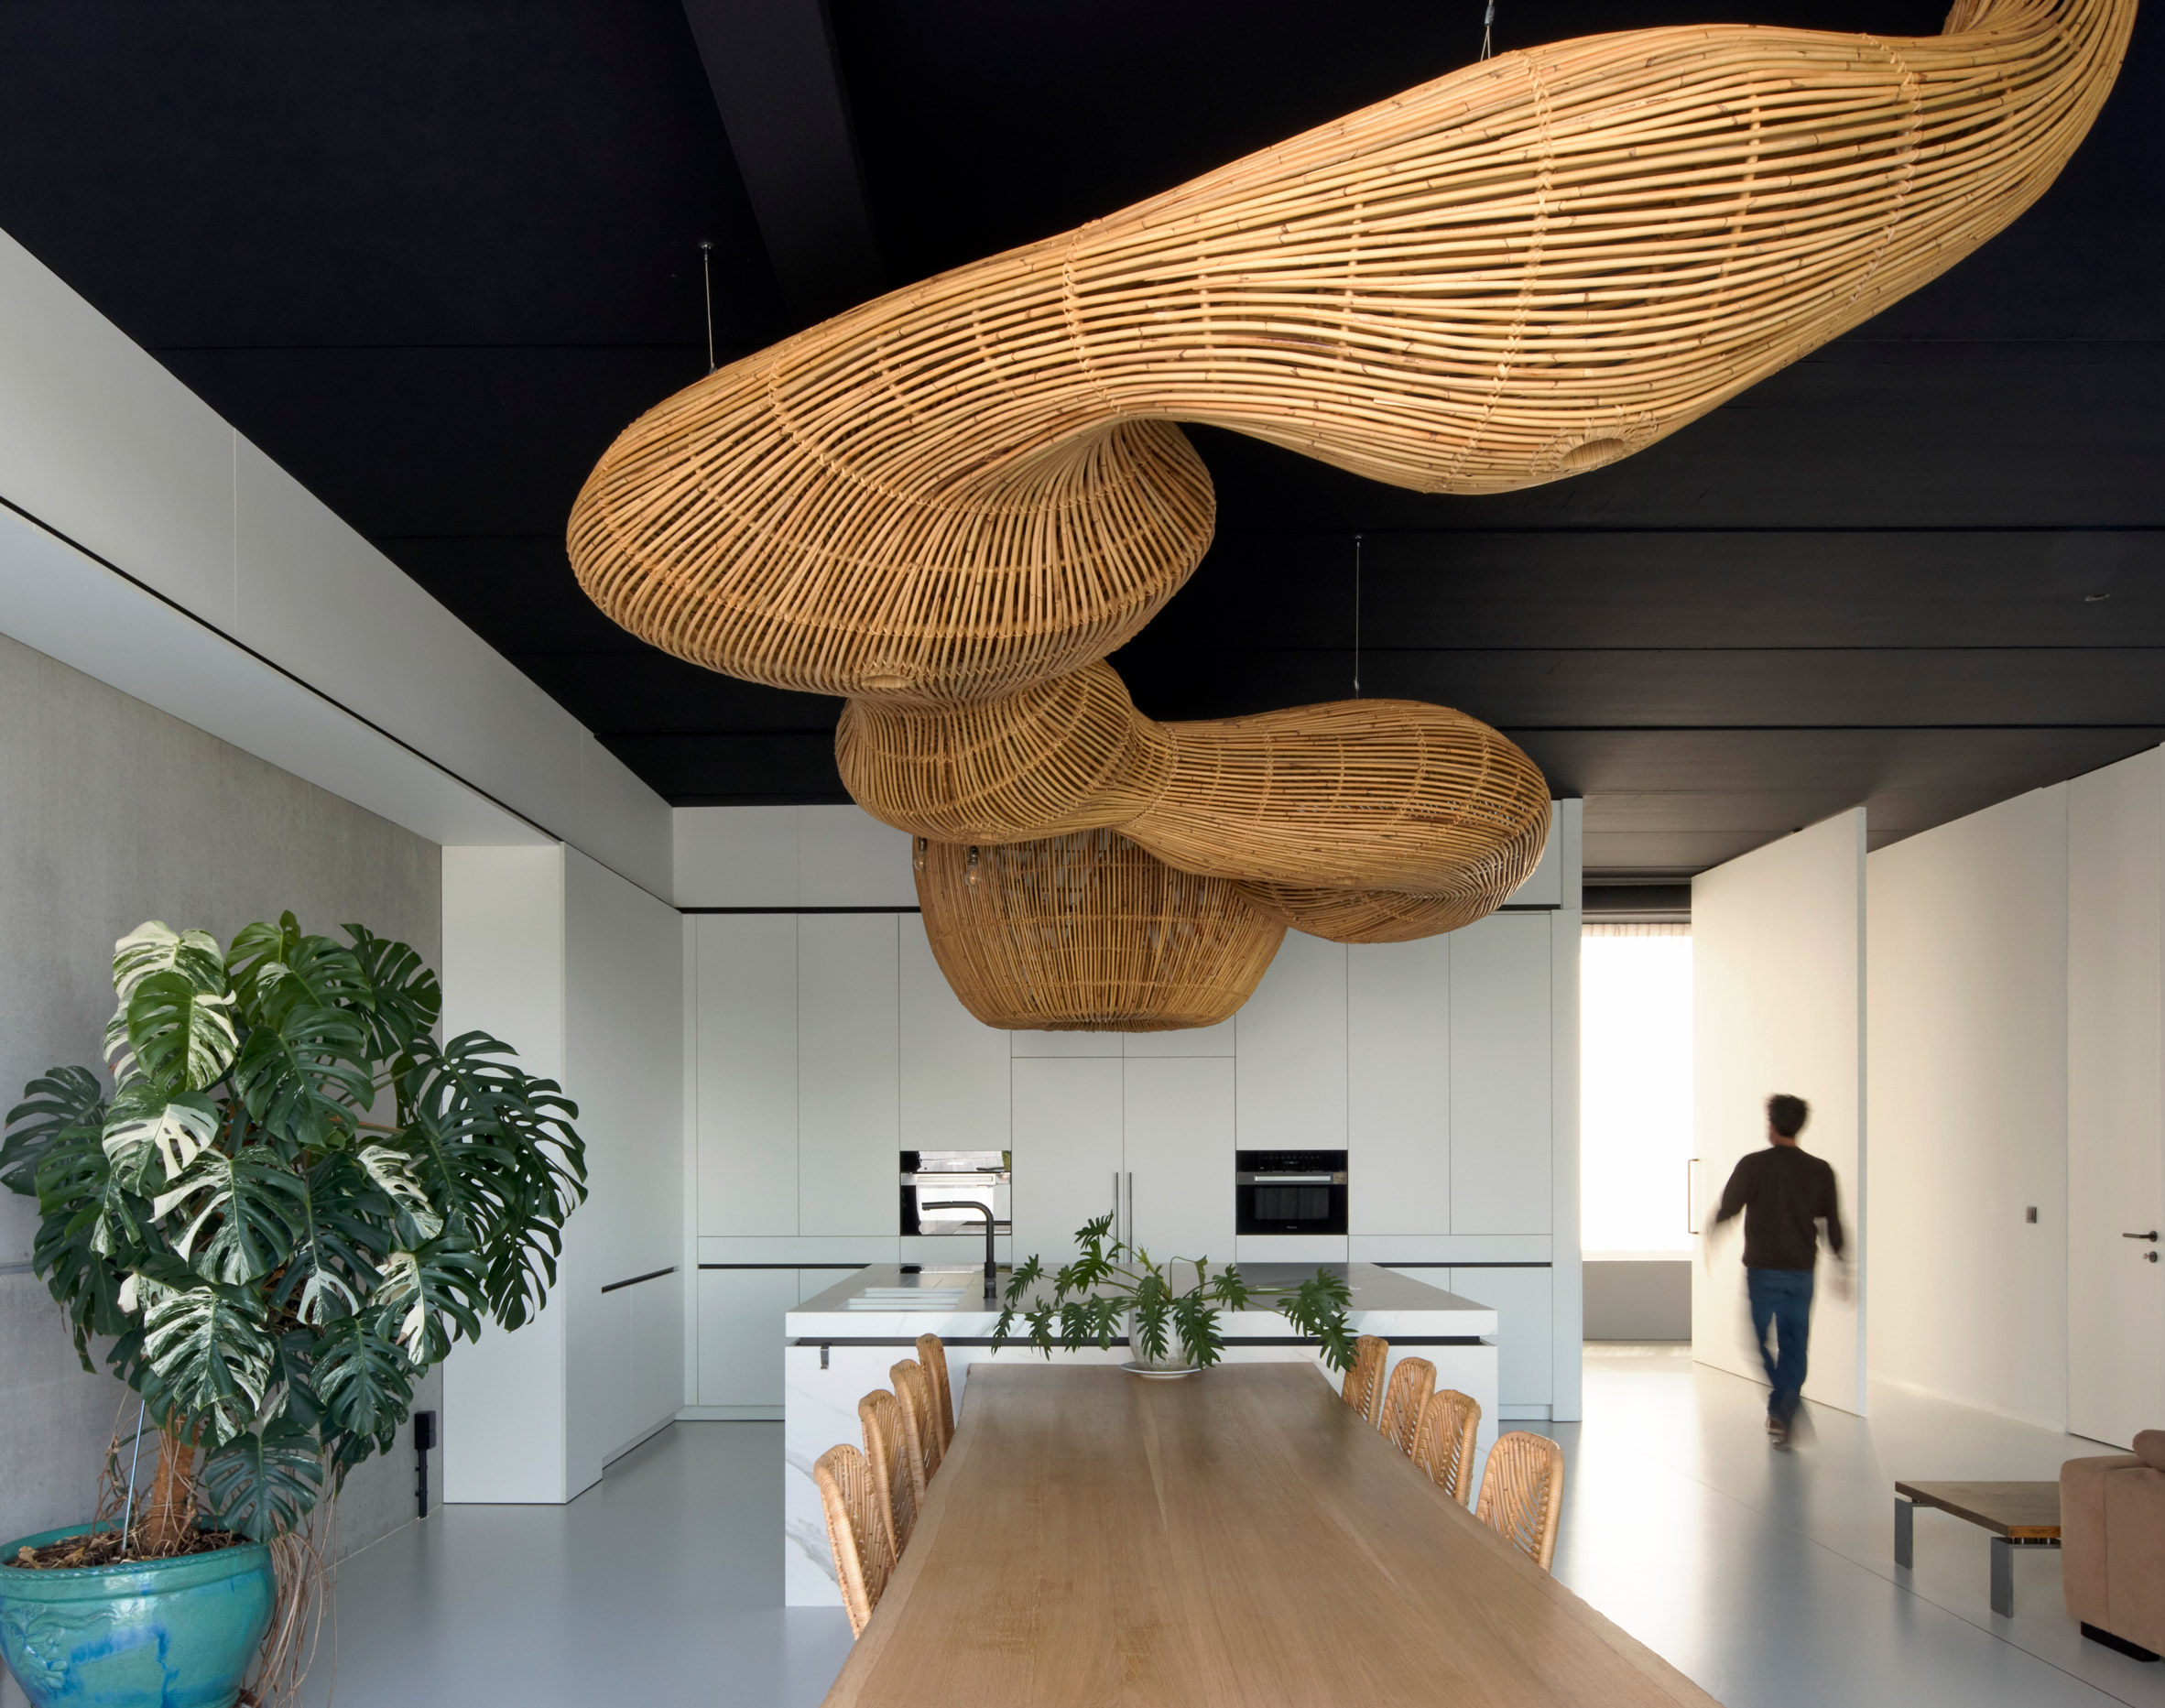 Office interior with rattan ceiling sculpture